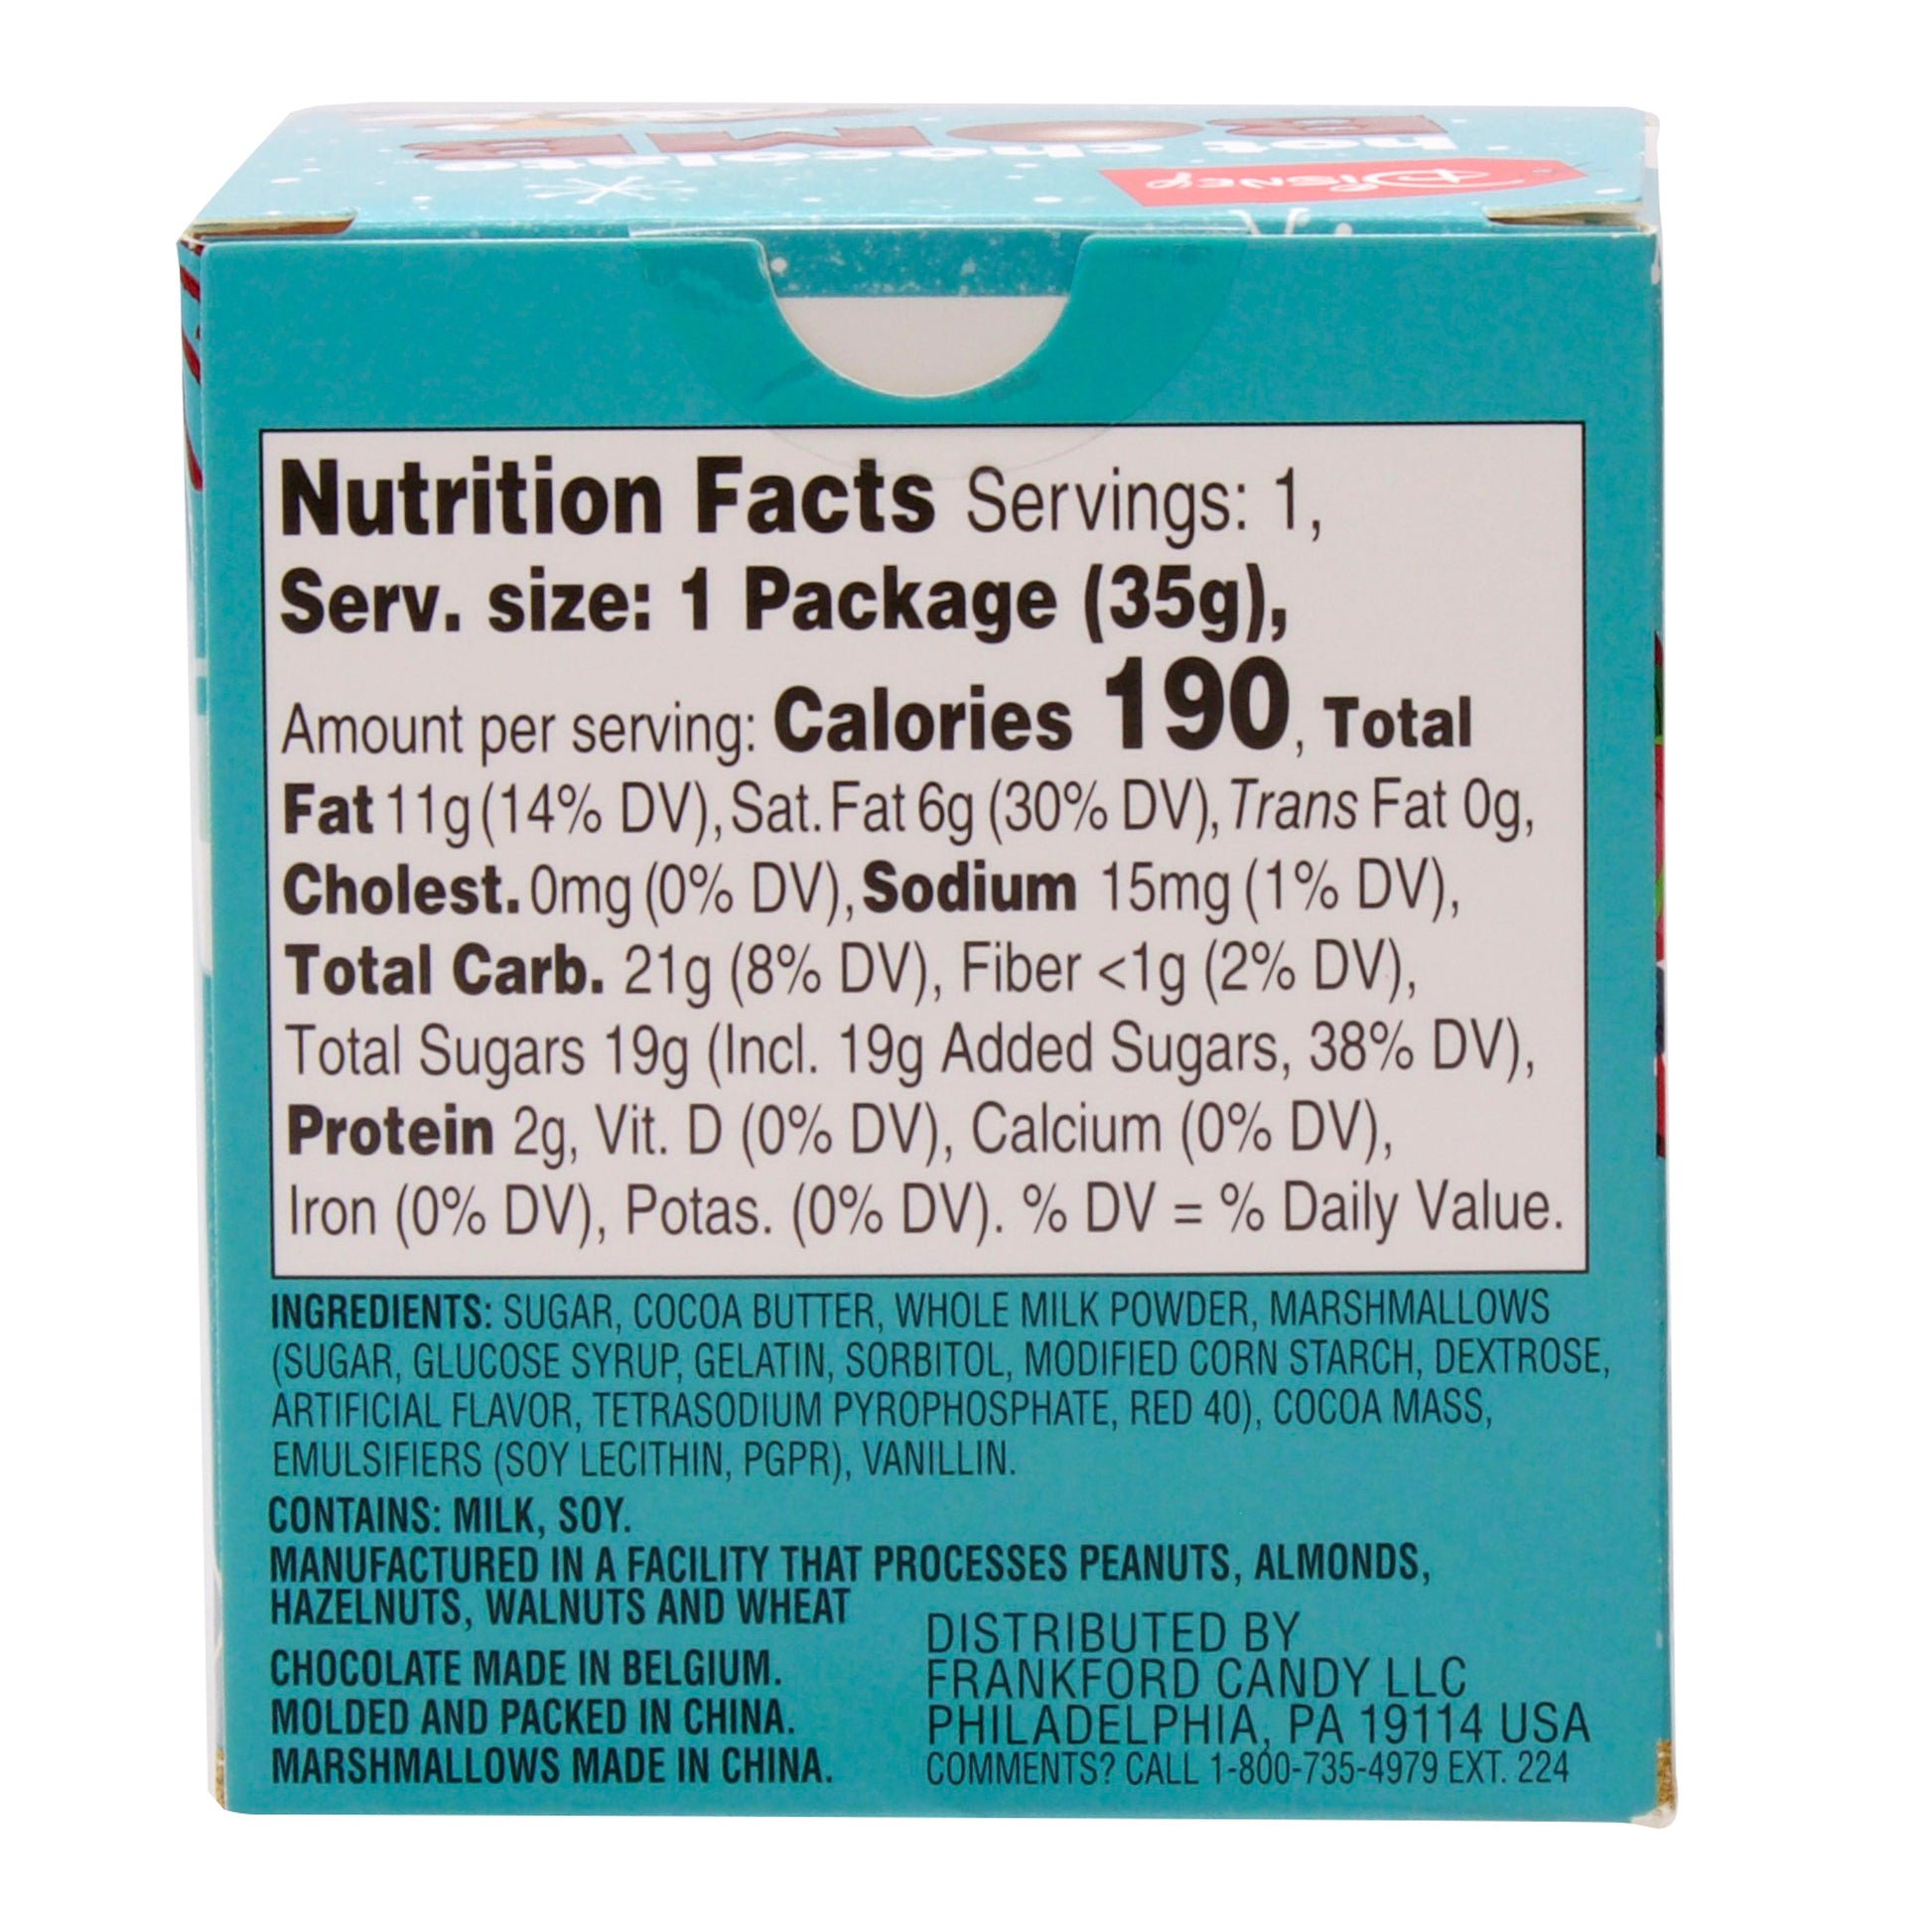 Back of blue box with nutrition facts and ingredients